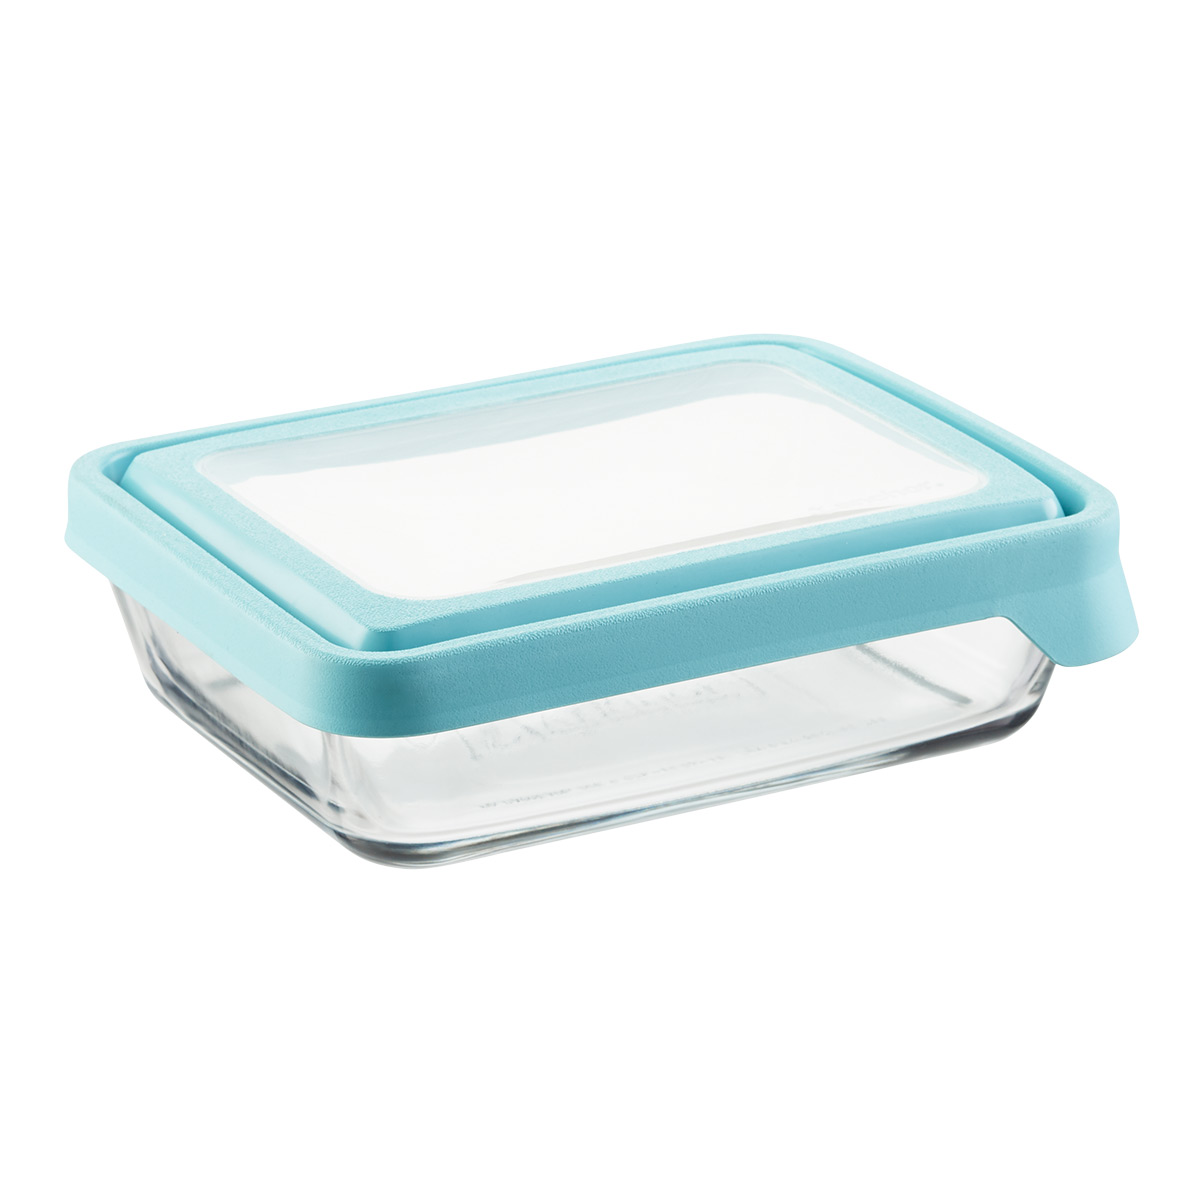 https://www.containerstore.com/catalogimages/351282/10076231-anchor-trueseal-container-r.jpg